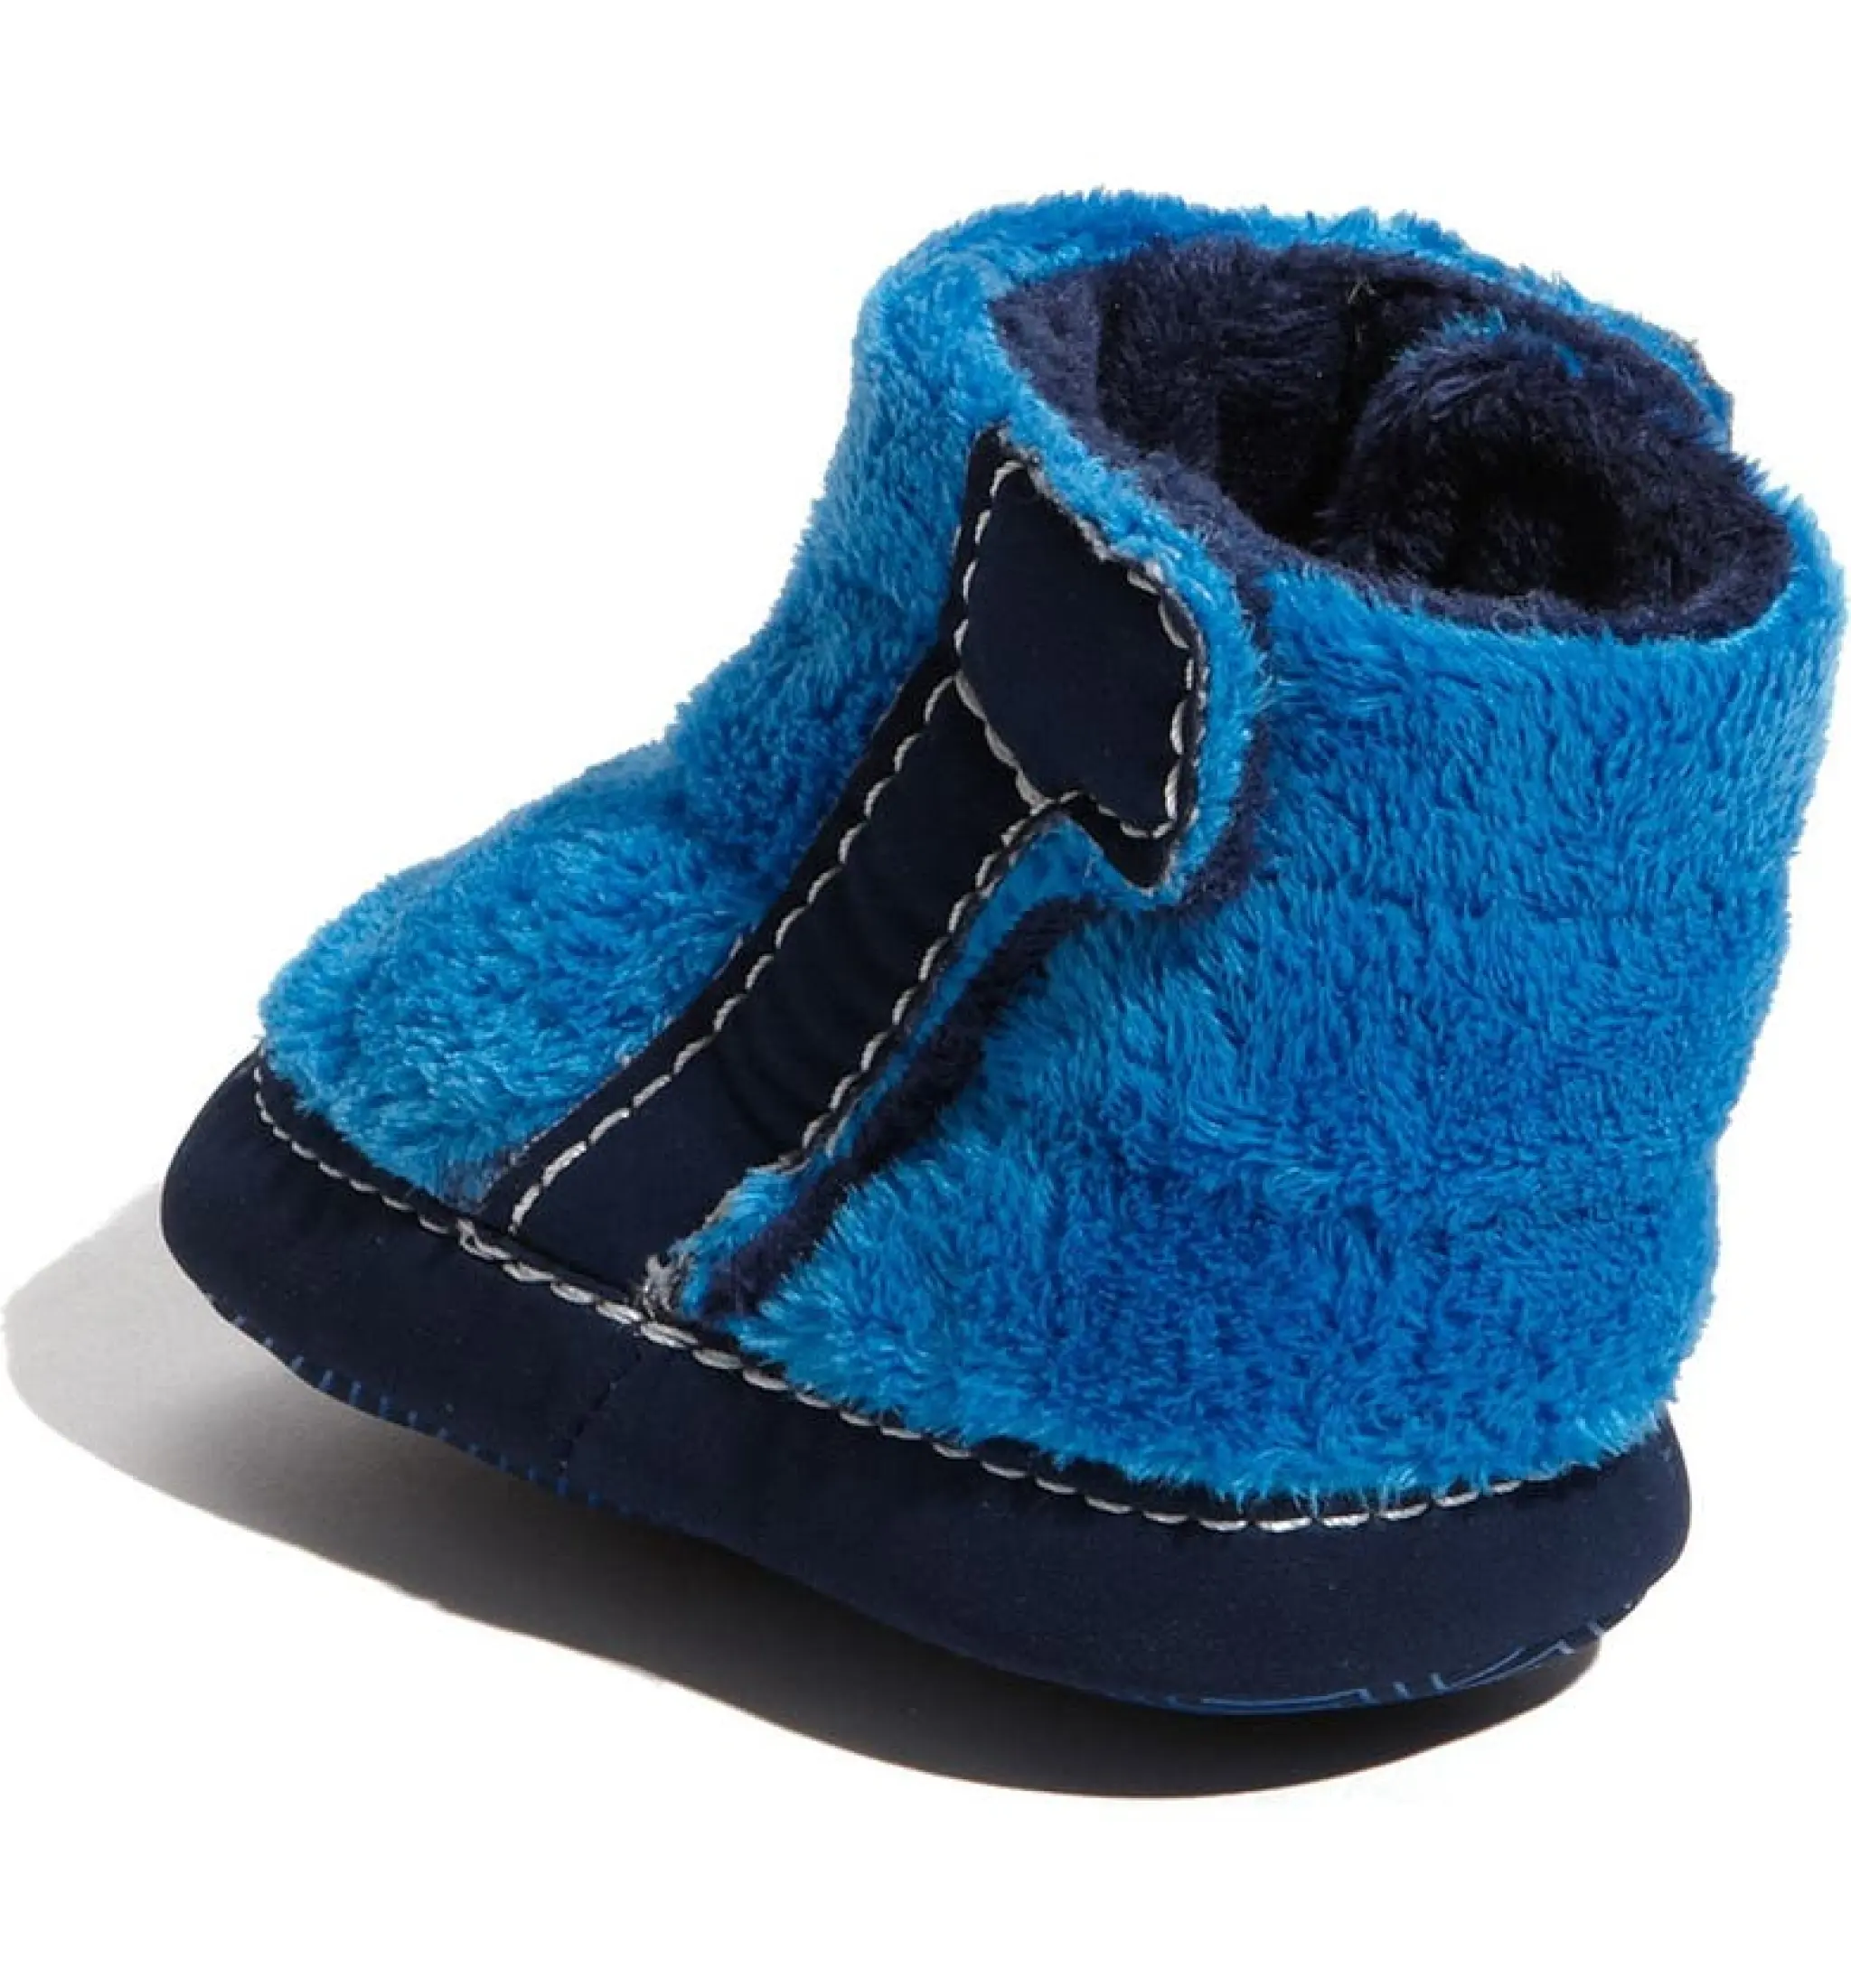 north face booties infant